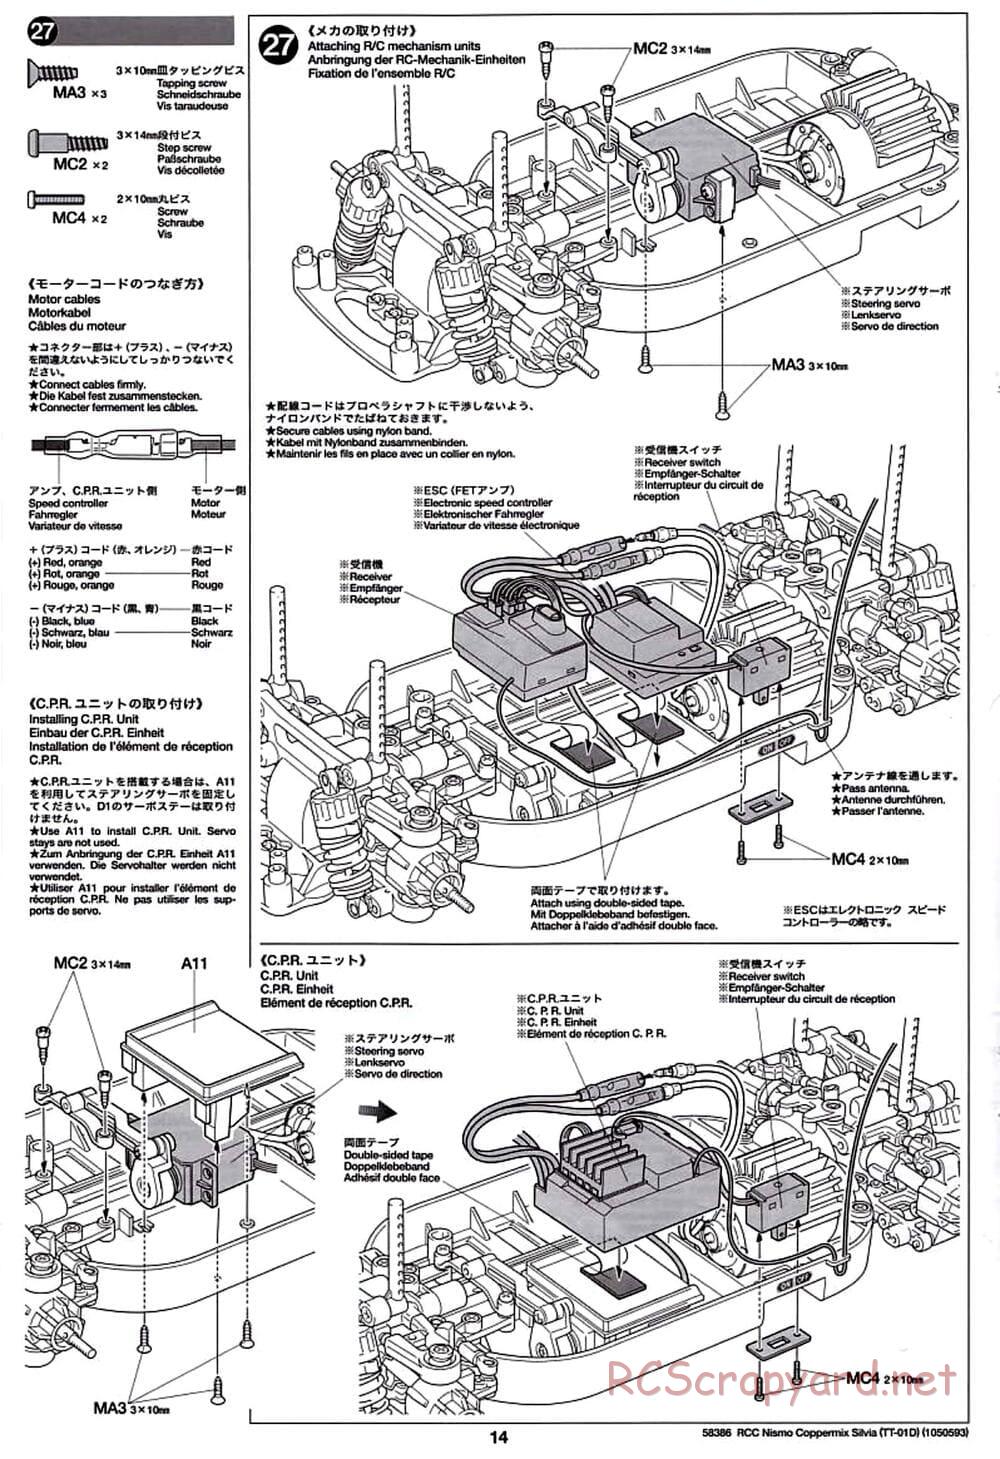 Tamiya - Nismo Coppermix Silvia Drift Spec - TT-01D Chassis - Manual - Page 14